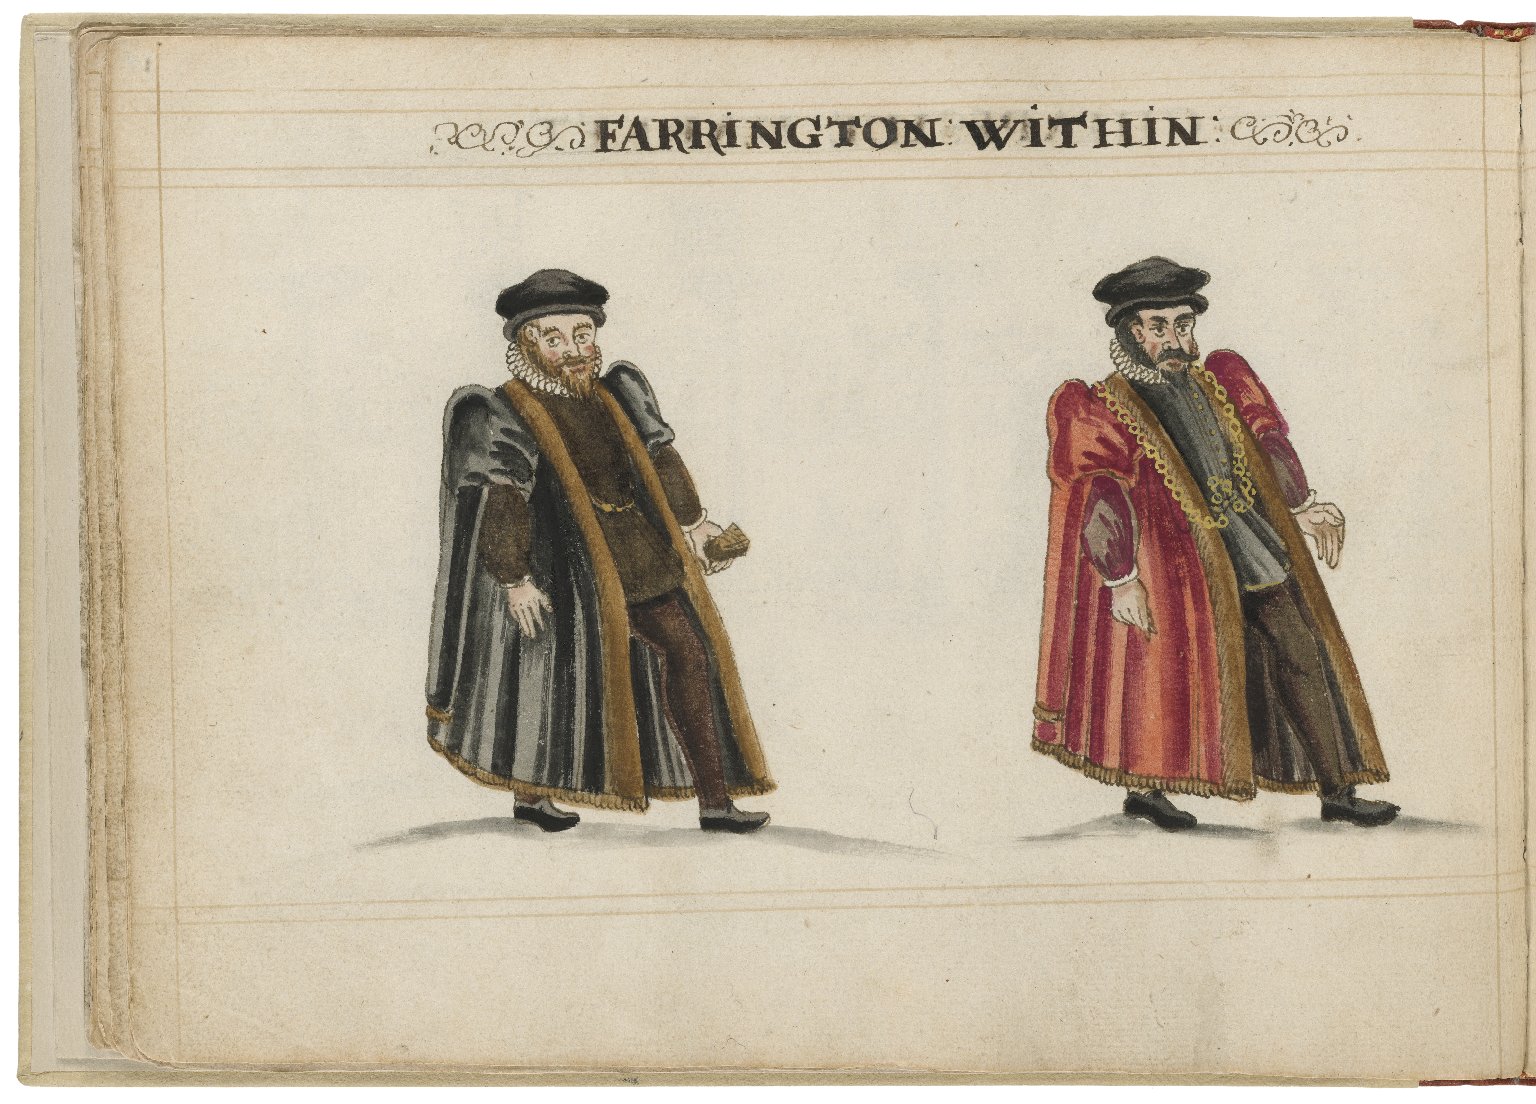 Watercolour painting of the alderman and deputy in charge of Farringdon Within Ward by Hugh Alley. Image courtesy of the Folger Digital Image Collection.